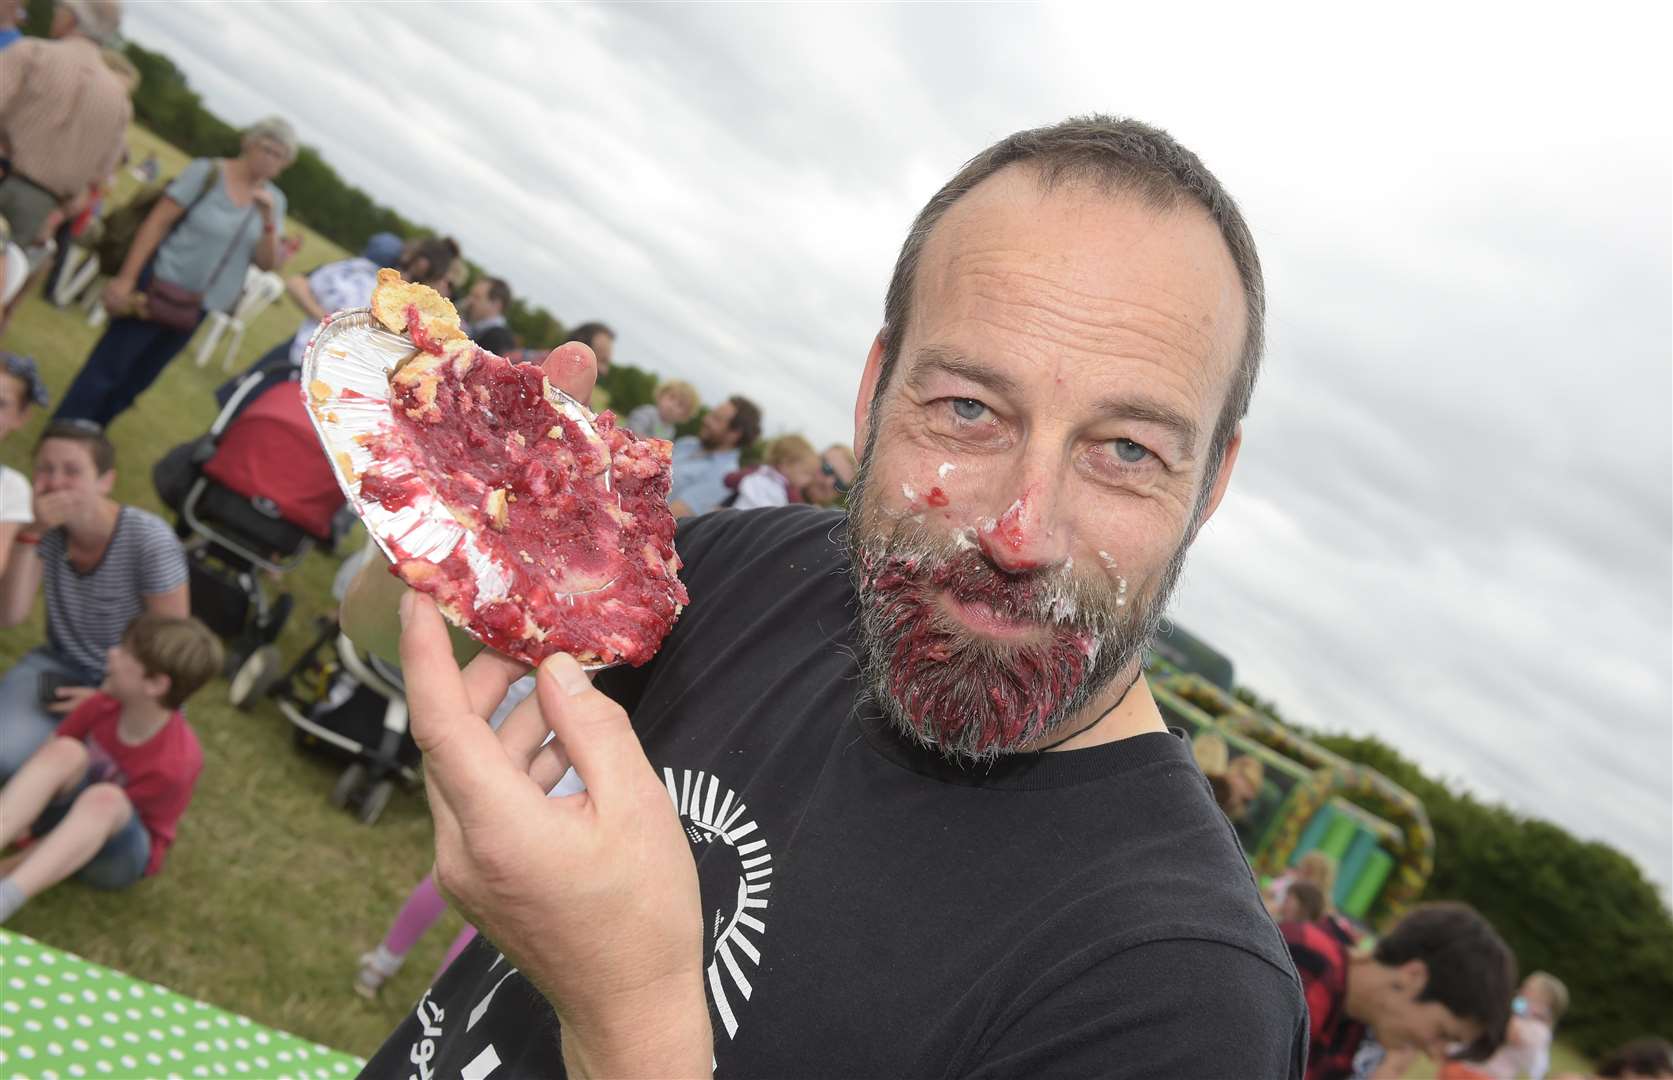 Dave Giles won the cherry pie eating competition last year. Picture: Tony Flashman